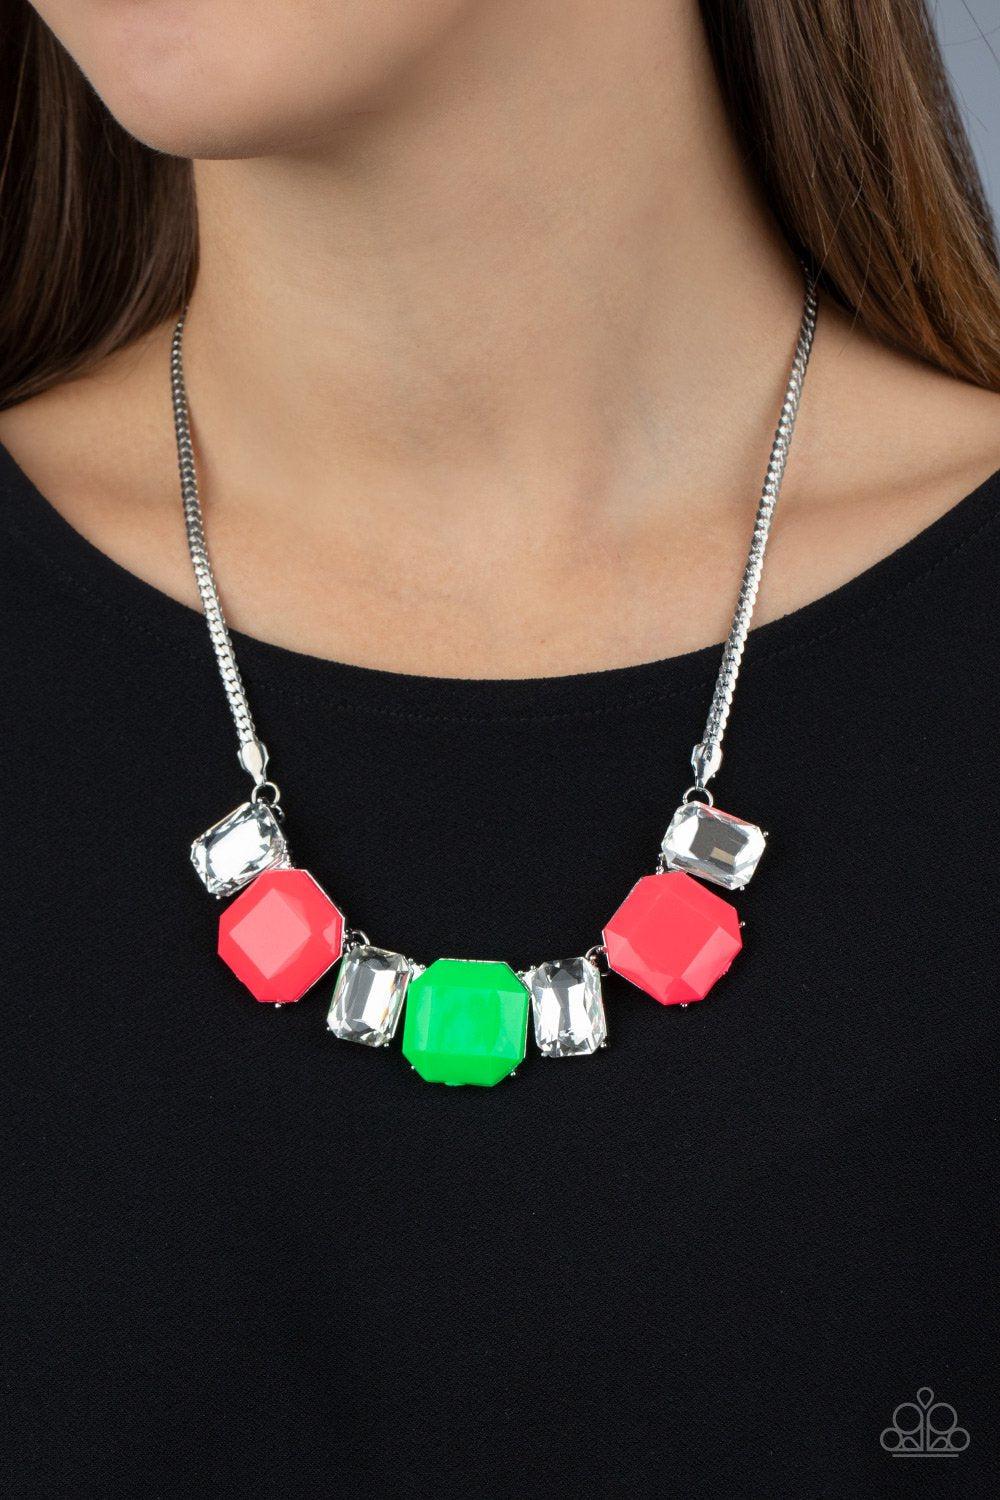 Royal Crest Neon Pink and Green Necklace - Paparazzi Accessories-CarasShop.com - $5 Jewelry by Cara Jewels